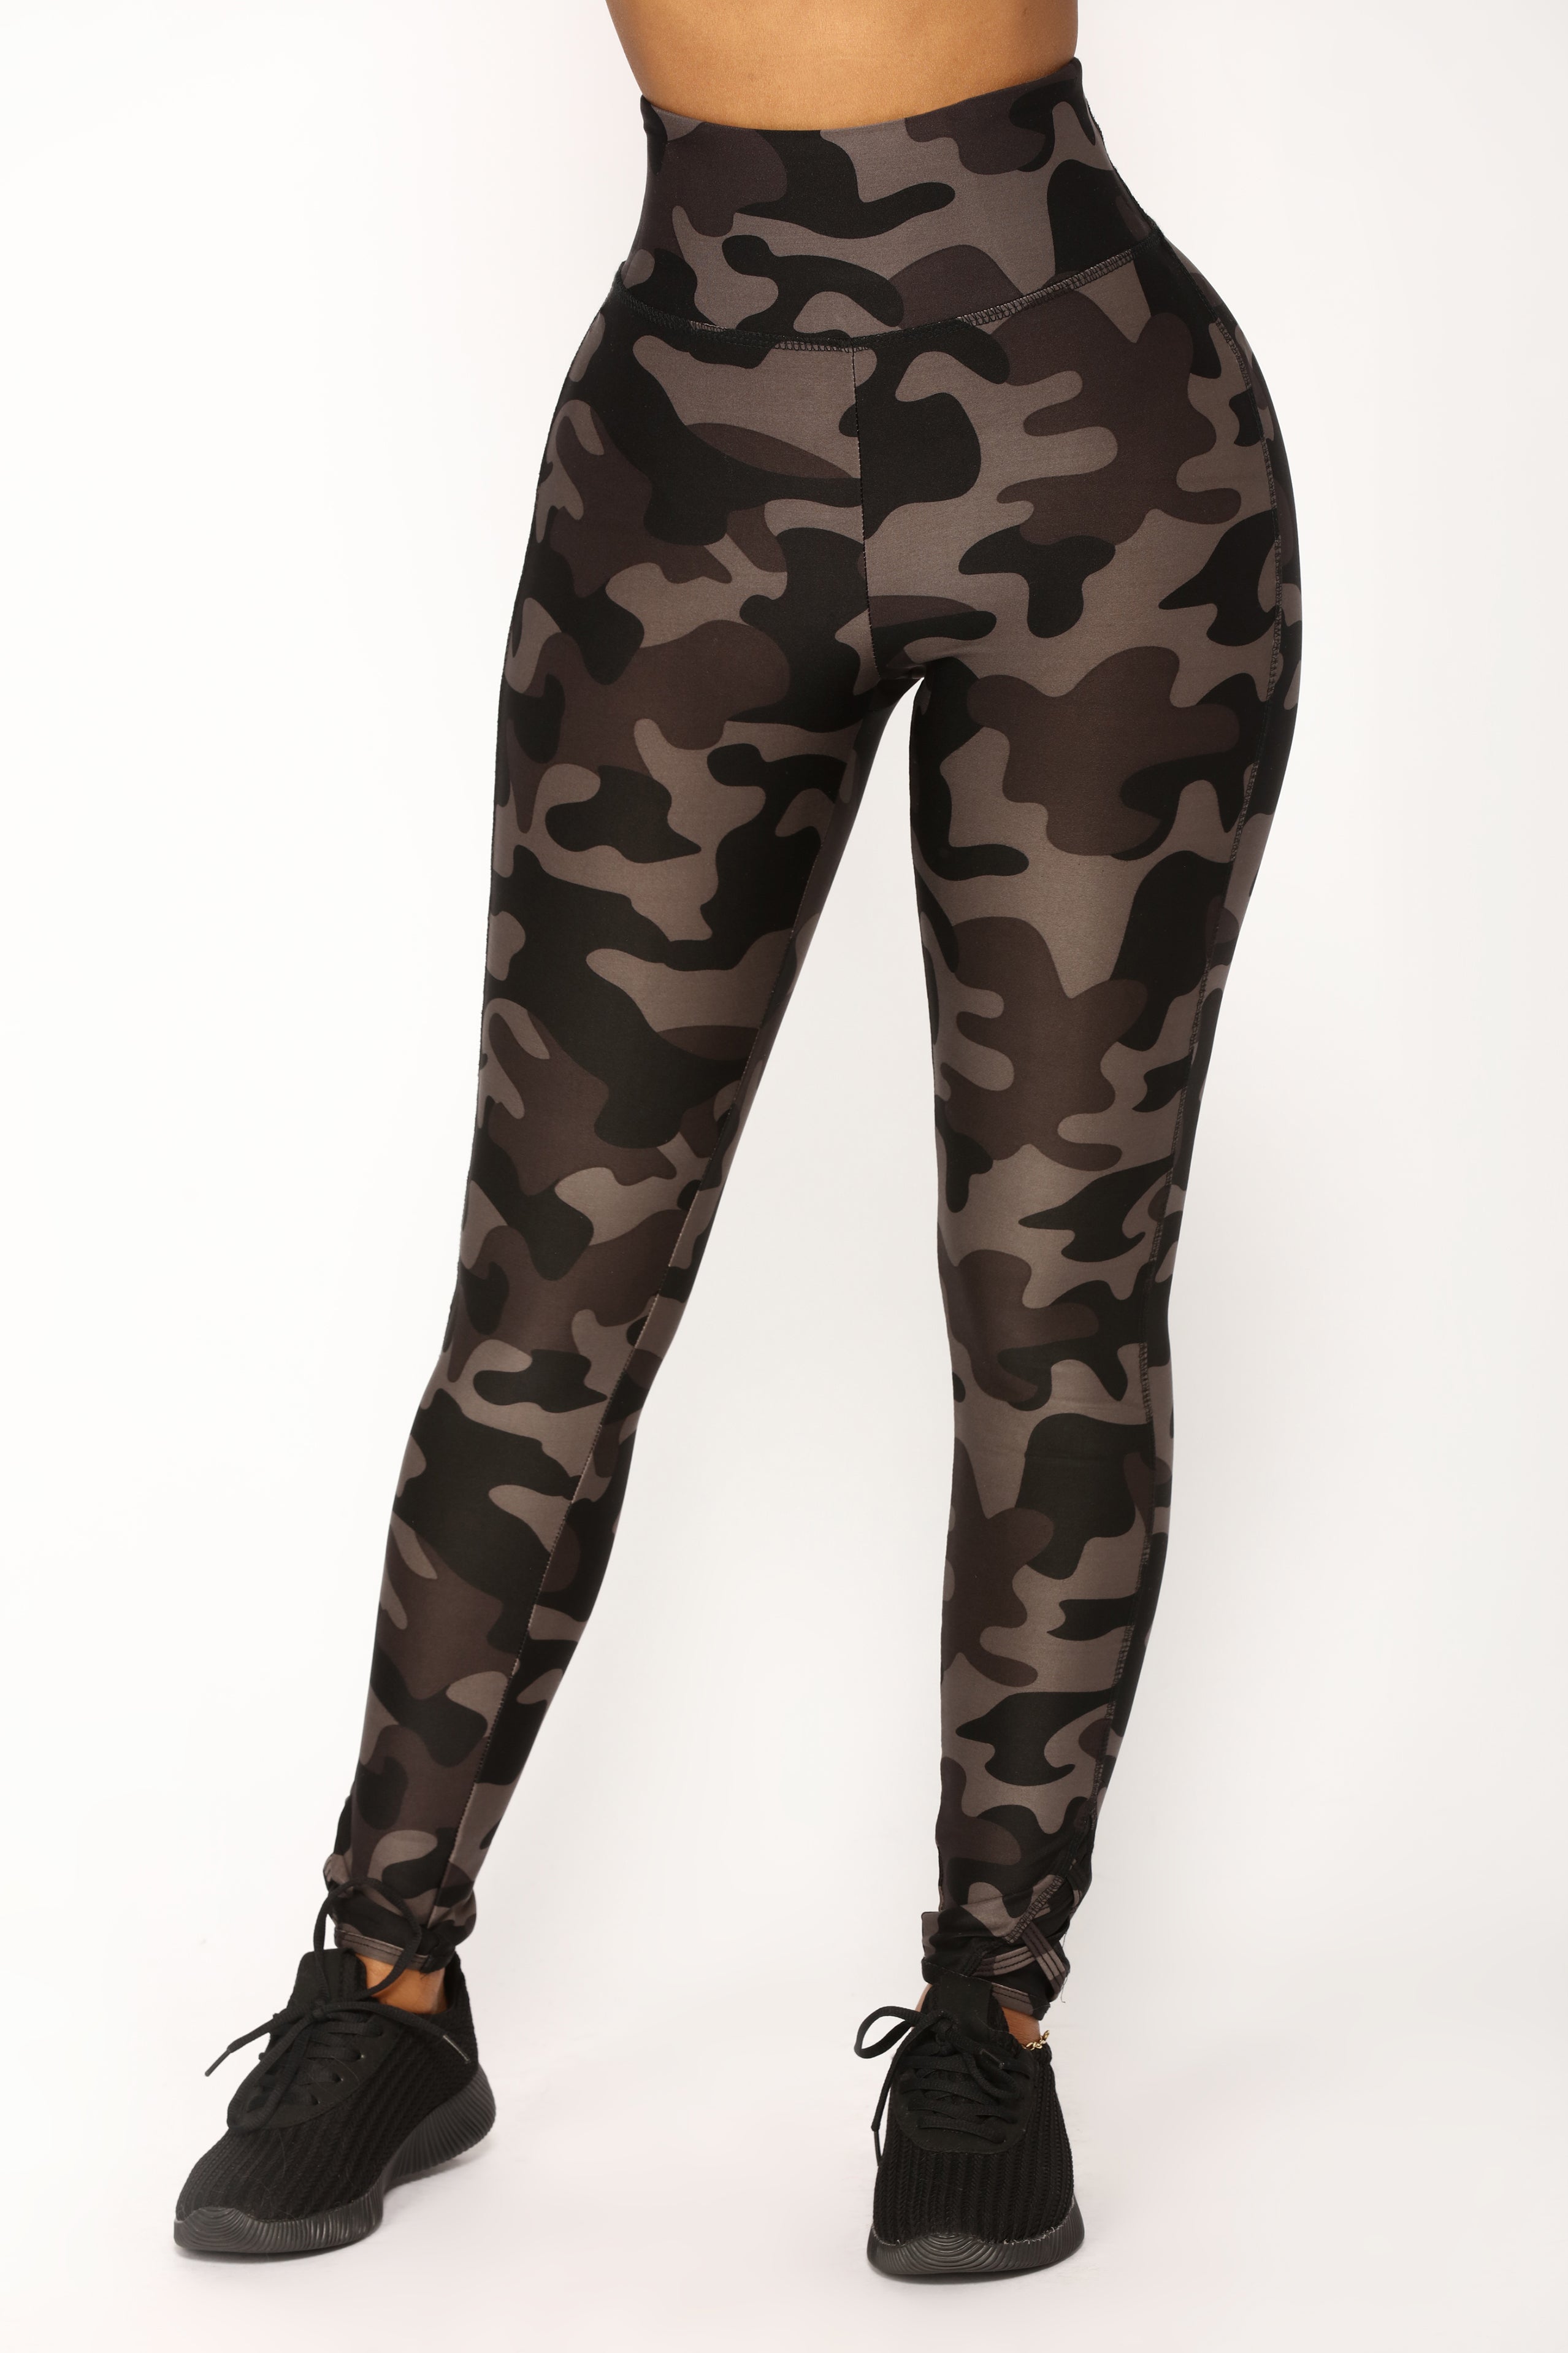 Black Camouflage Leggings for Women With 5 High Waist, Slimming, Yoga Pants,  Buttery Soft, One Size & Plus Size Leggings, Non-see Through 